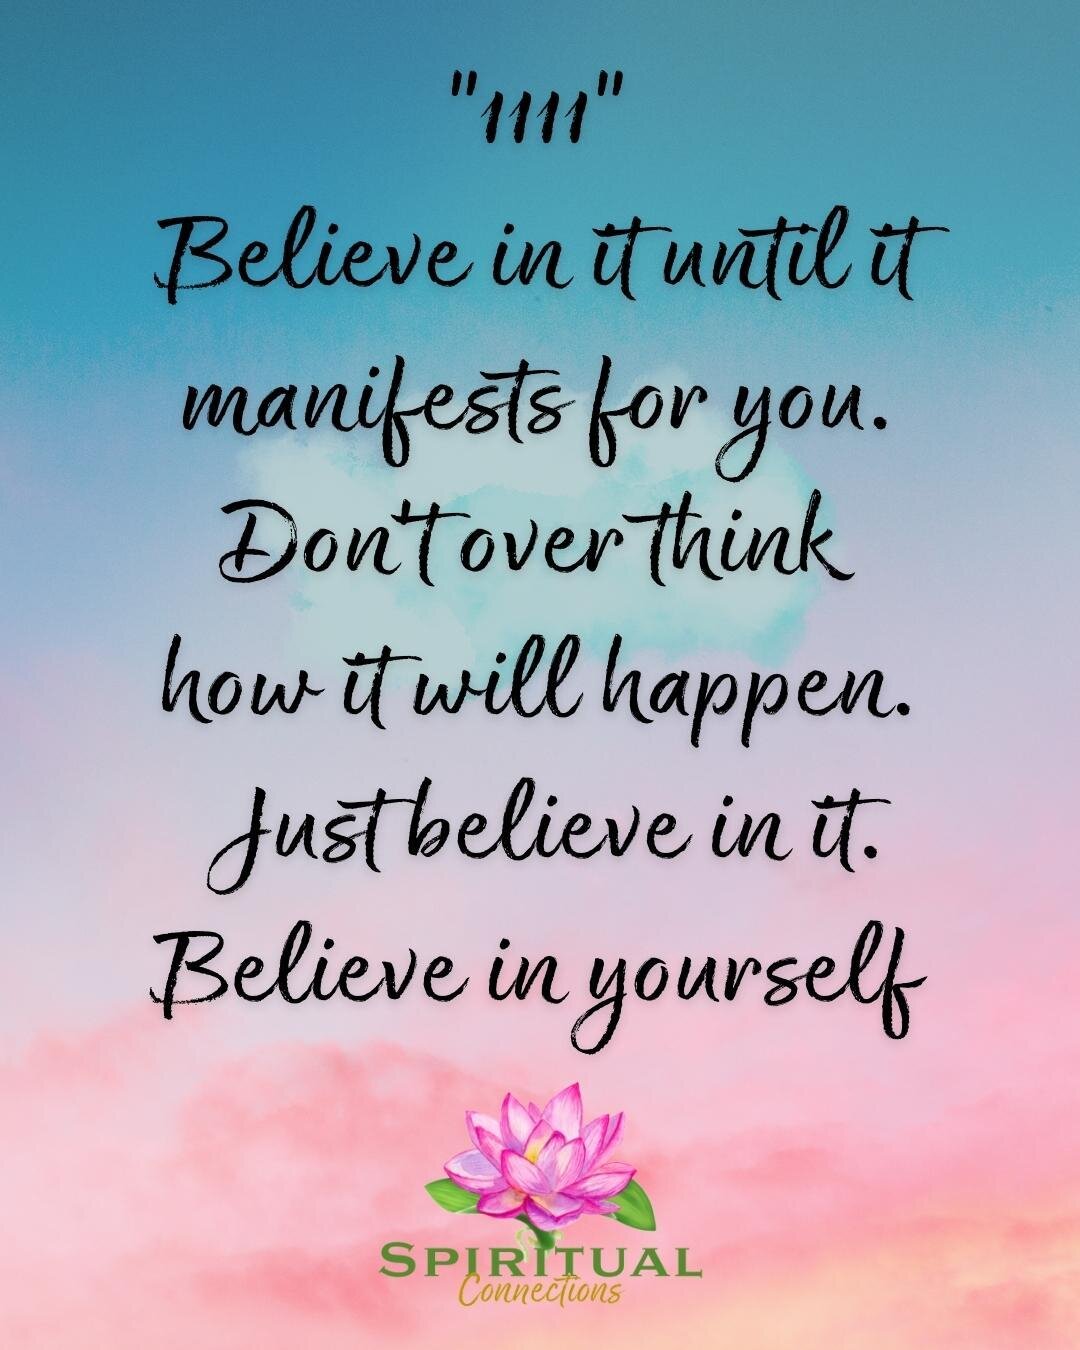 &quot;1111&quot; Believe in it until it manifests for you.
Save it! Claim it! Send it!

#spiritualawakening #numerology #lawofattraction #manifestation #spirituality #angels #angelnumber #love #astrology #angelmessages #numerologyreading #angel #sync